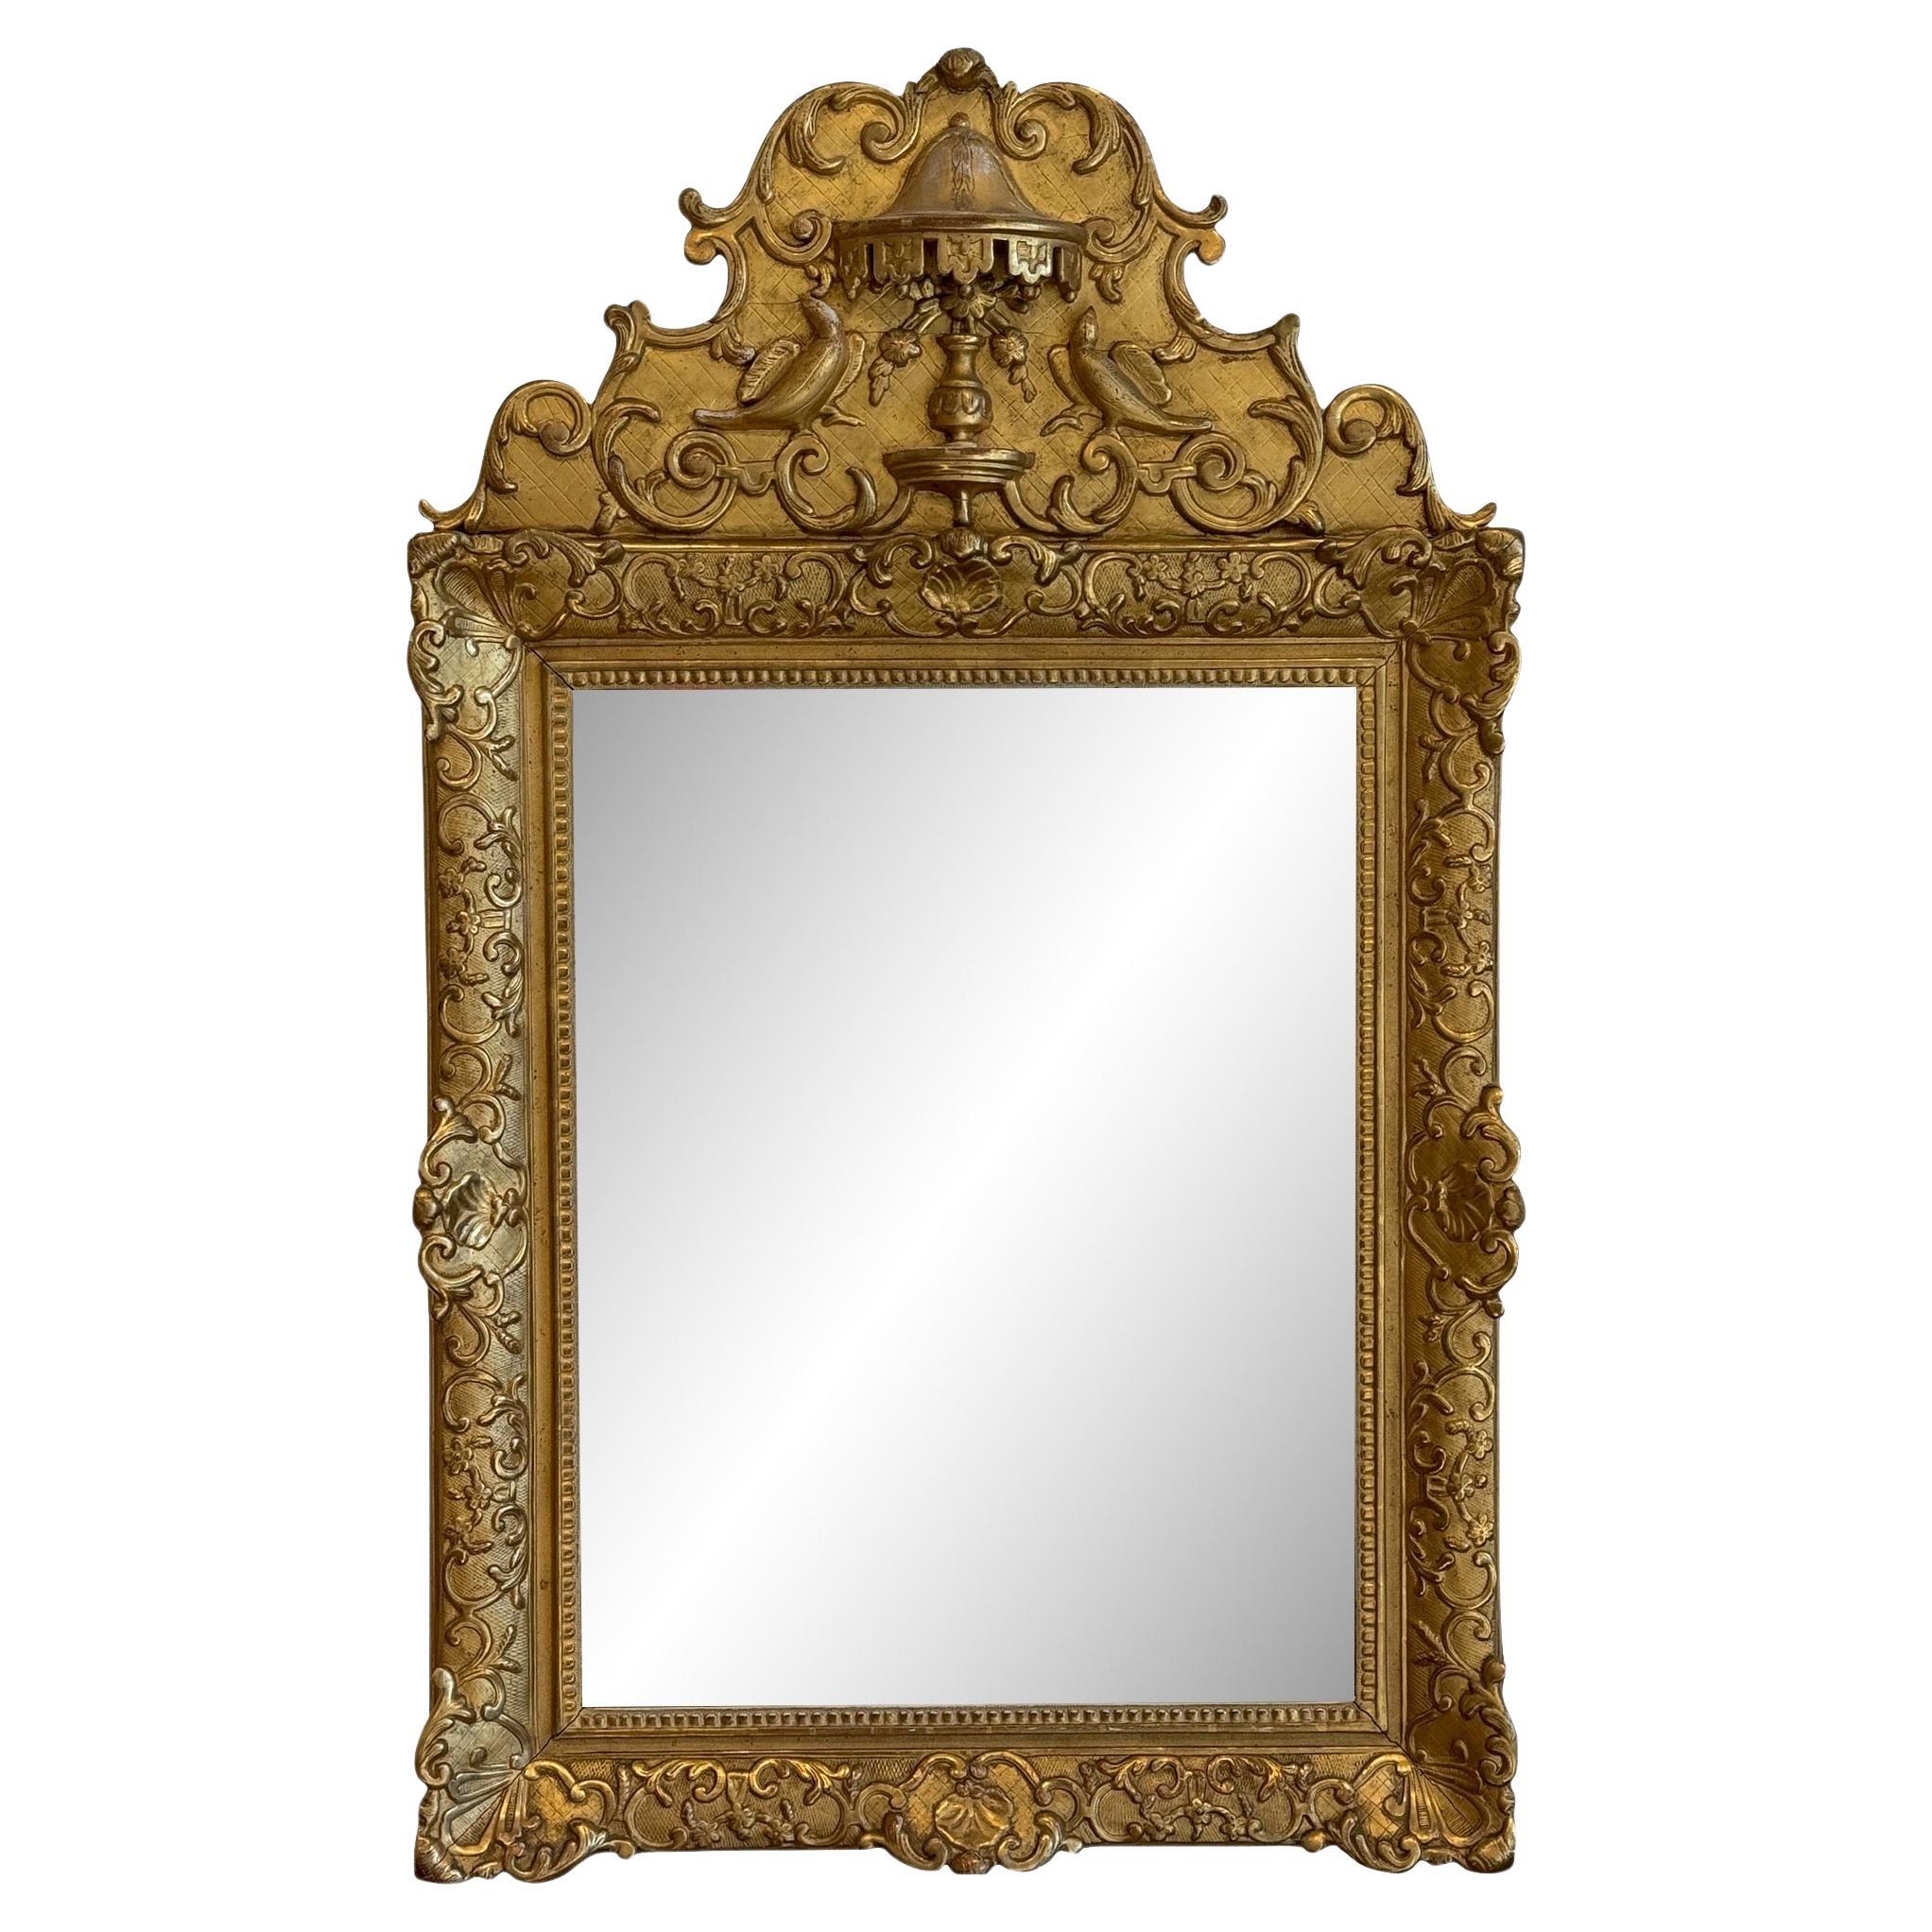 19th Century French Gilded Mirror